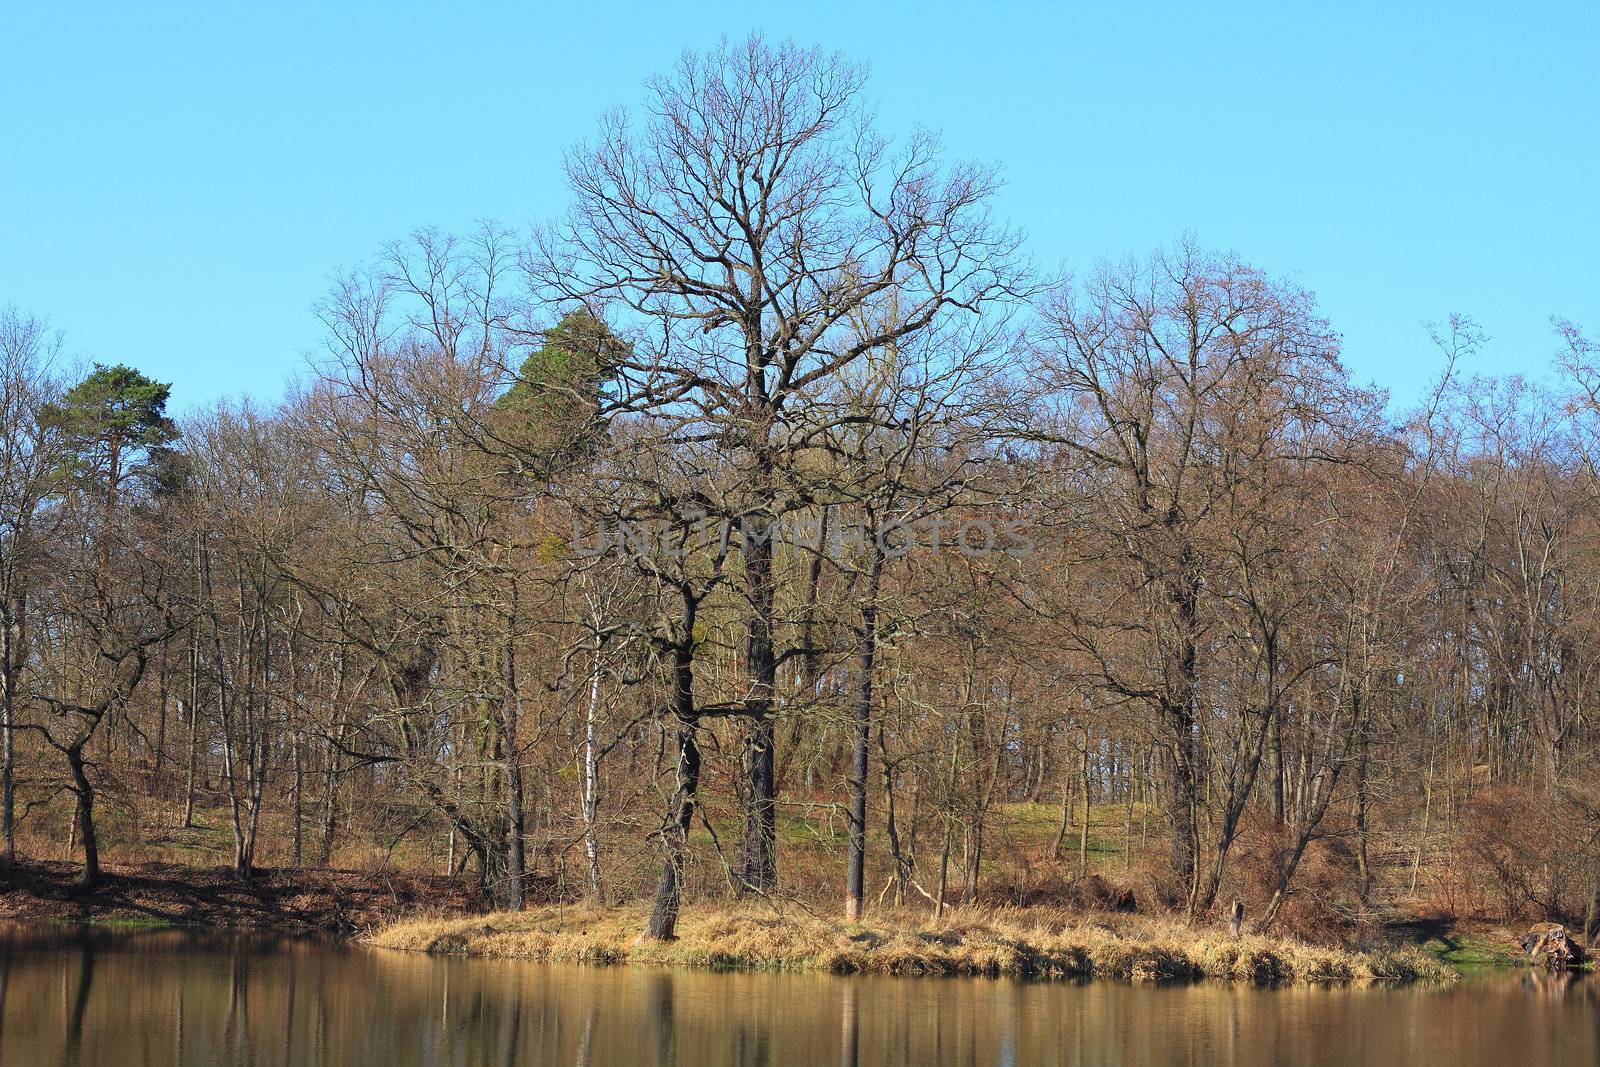 Small island in a lake in early spring